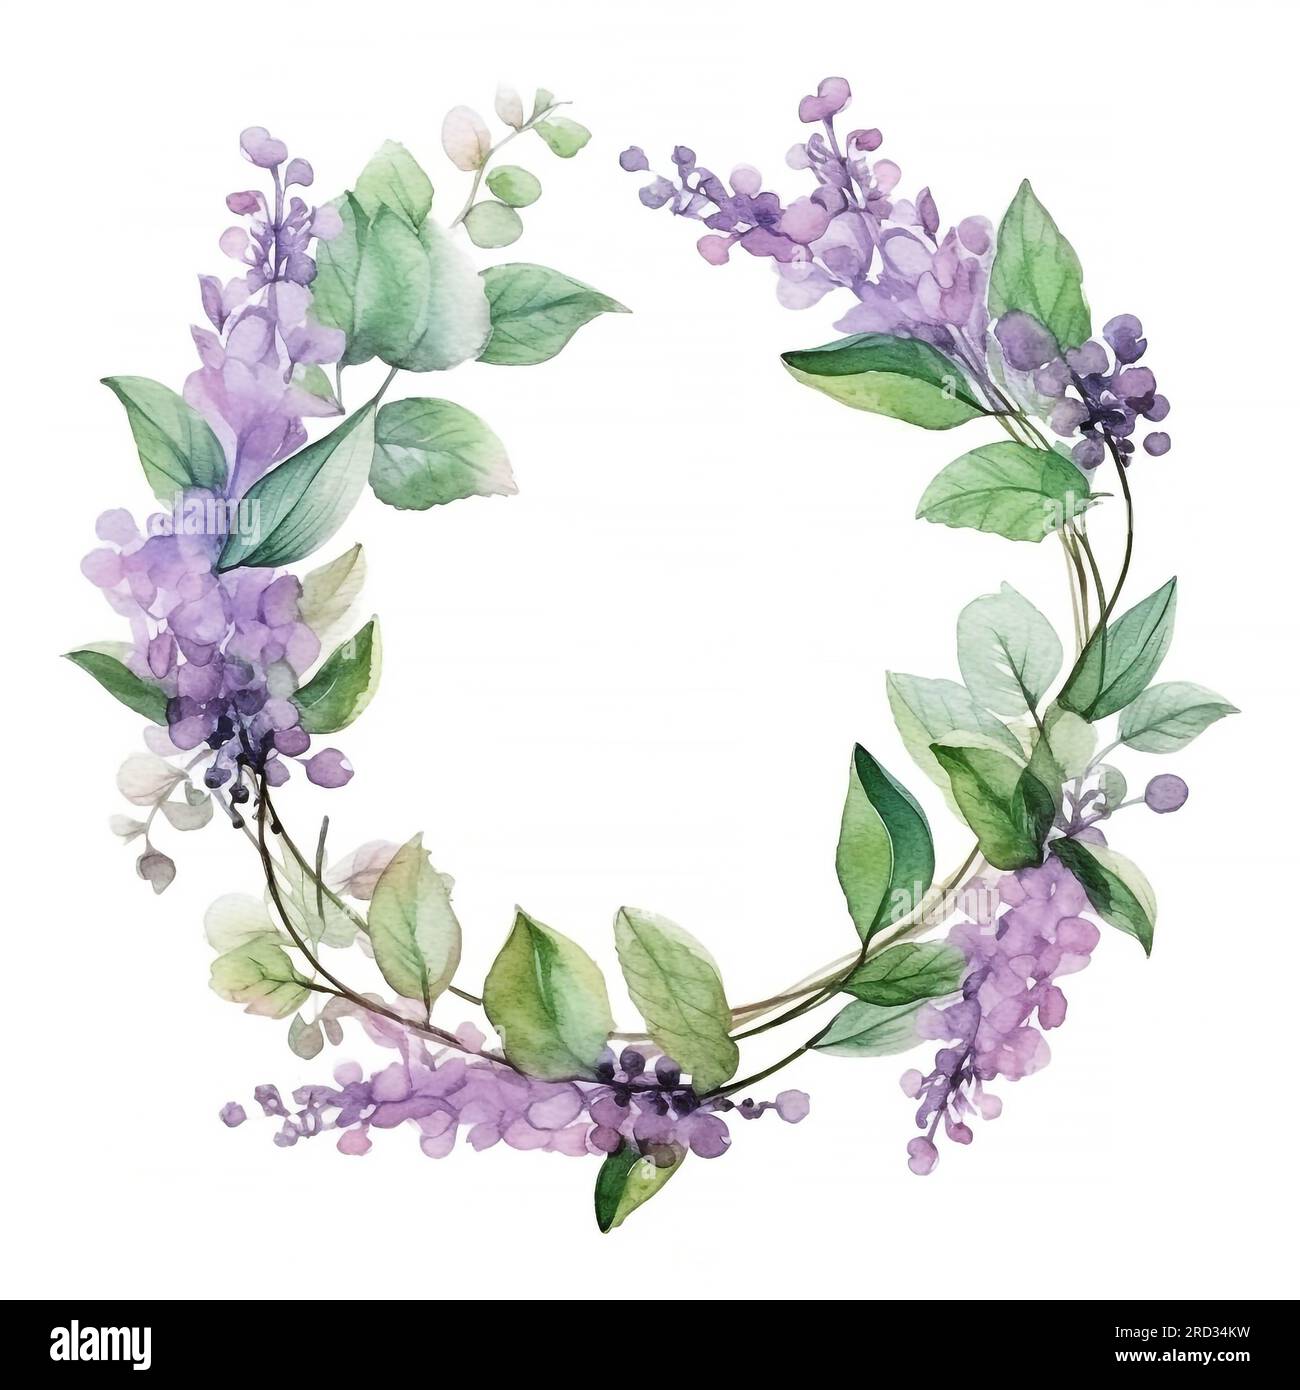 Watercolor wreath with patchouli: patchouli branch with leaves and flowers. Cosmetics and medical plant. Hand drawn illustration. Stock Photo